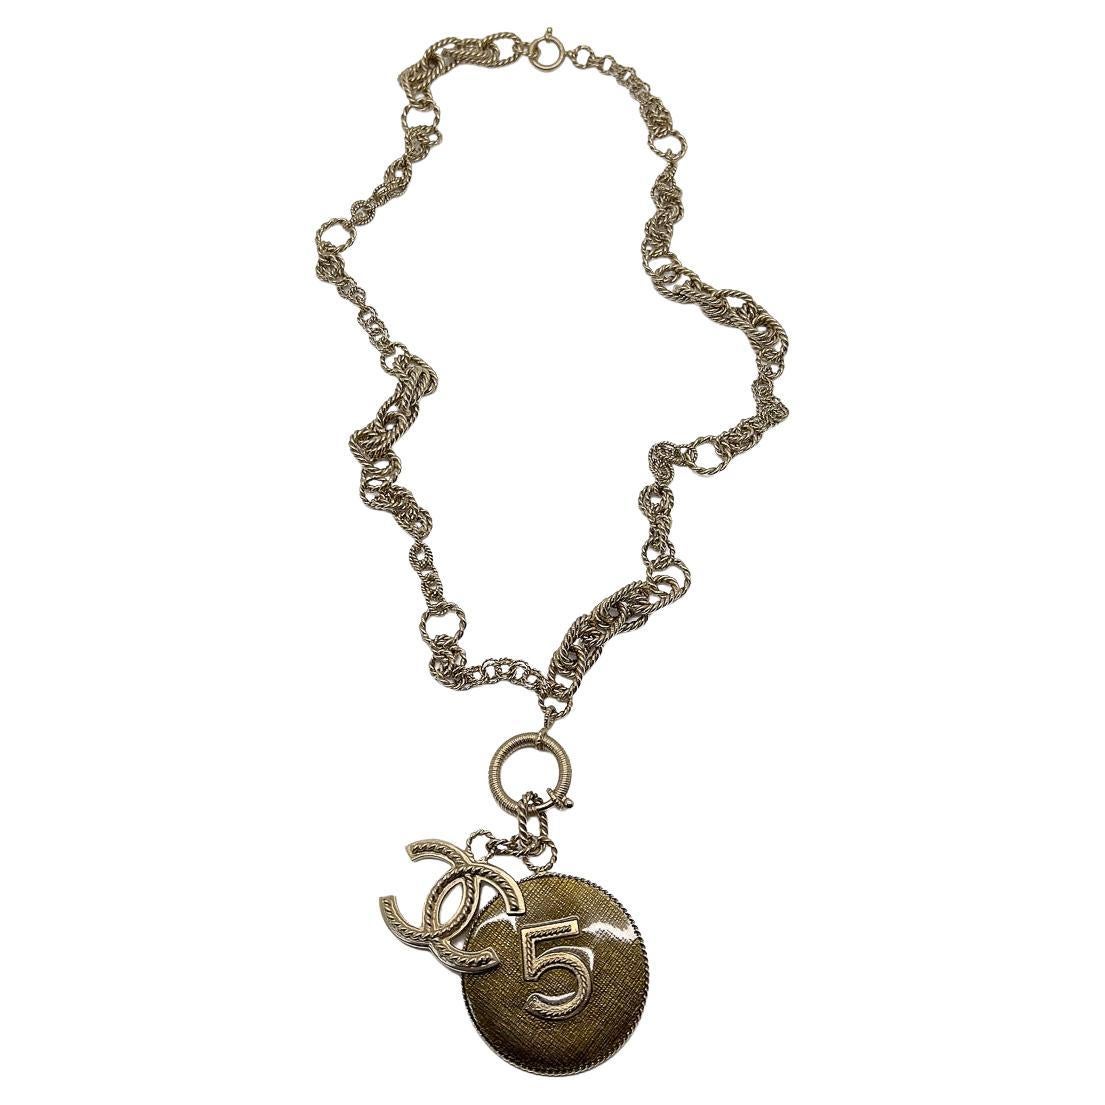 chanel necklace double chain heart